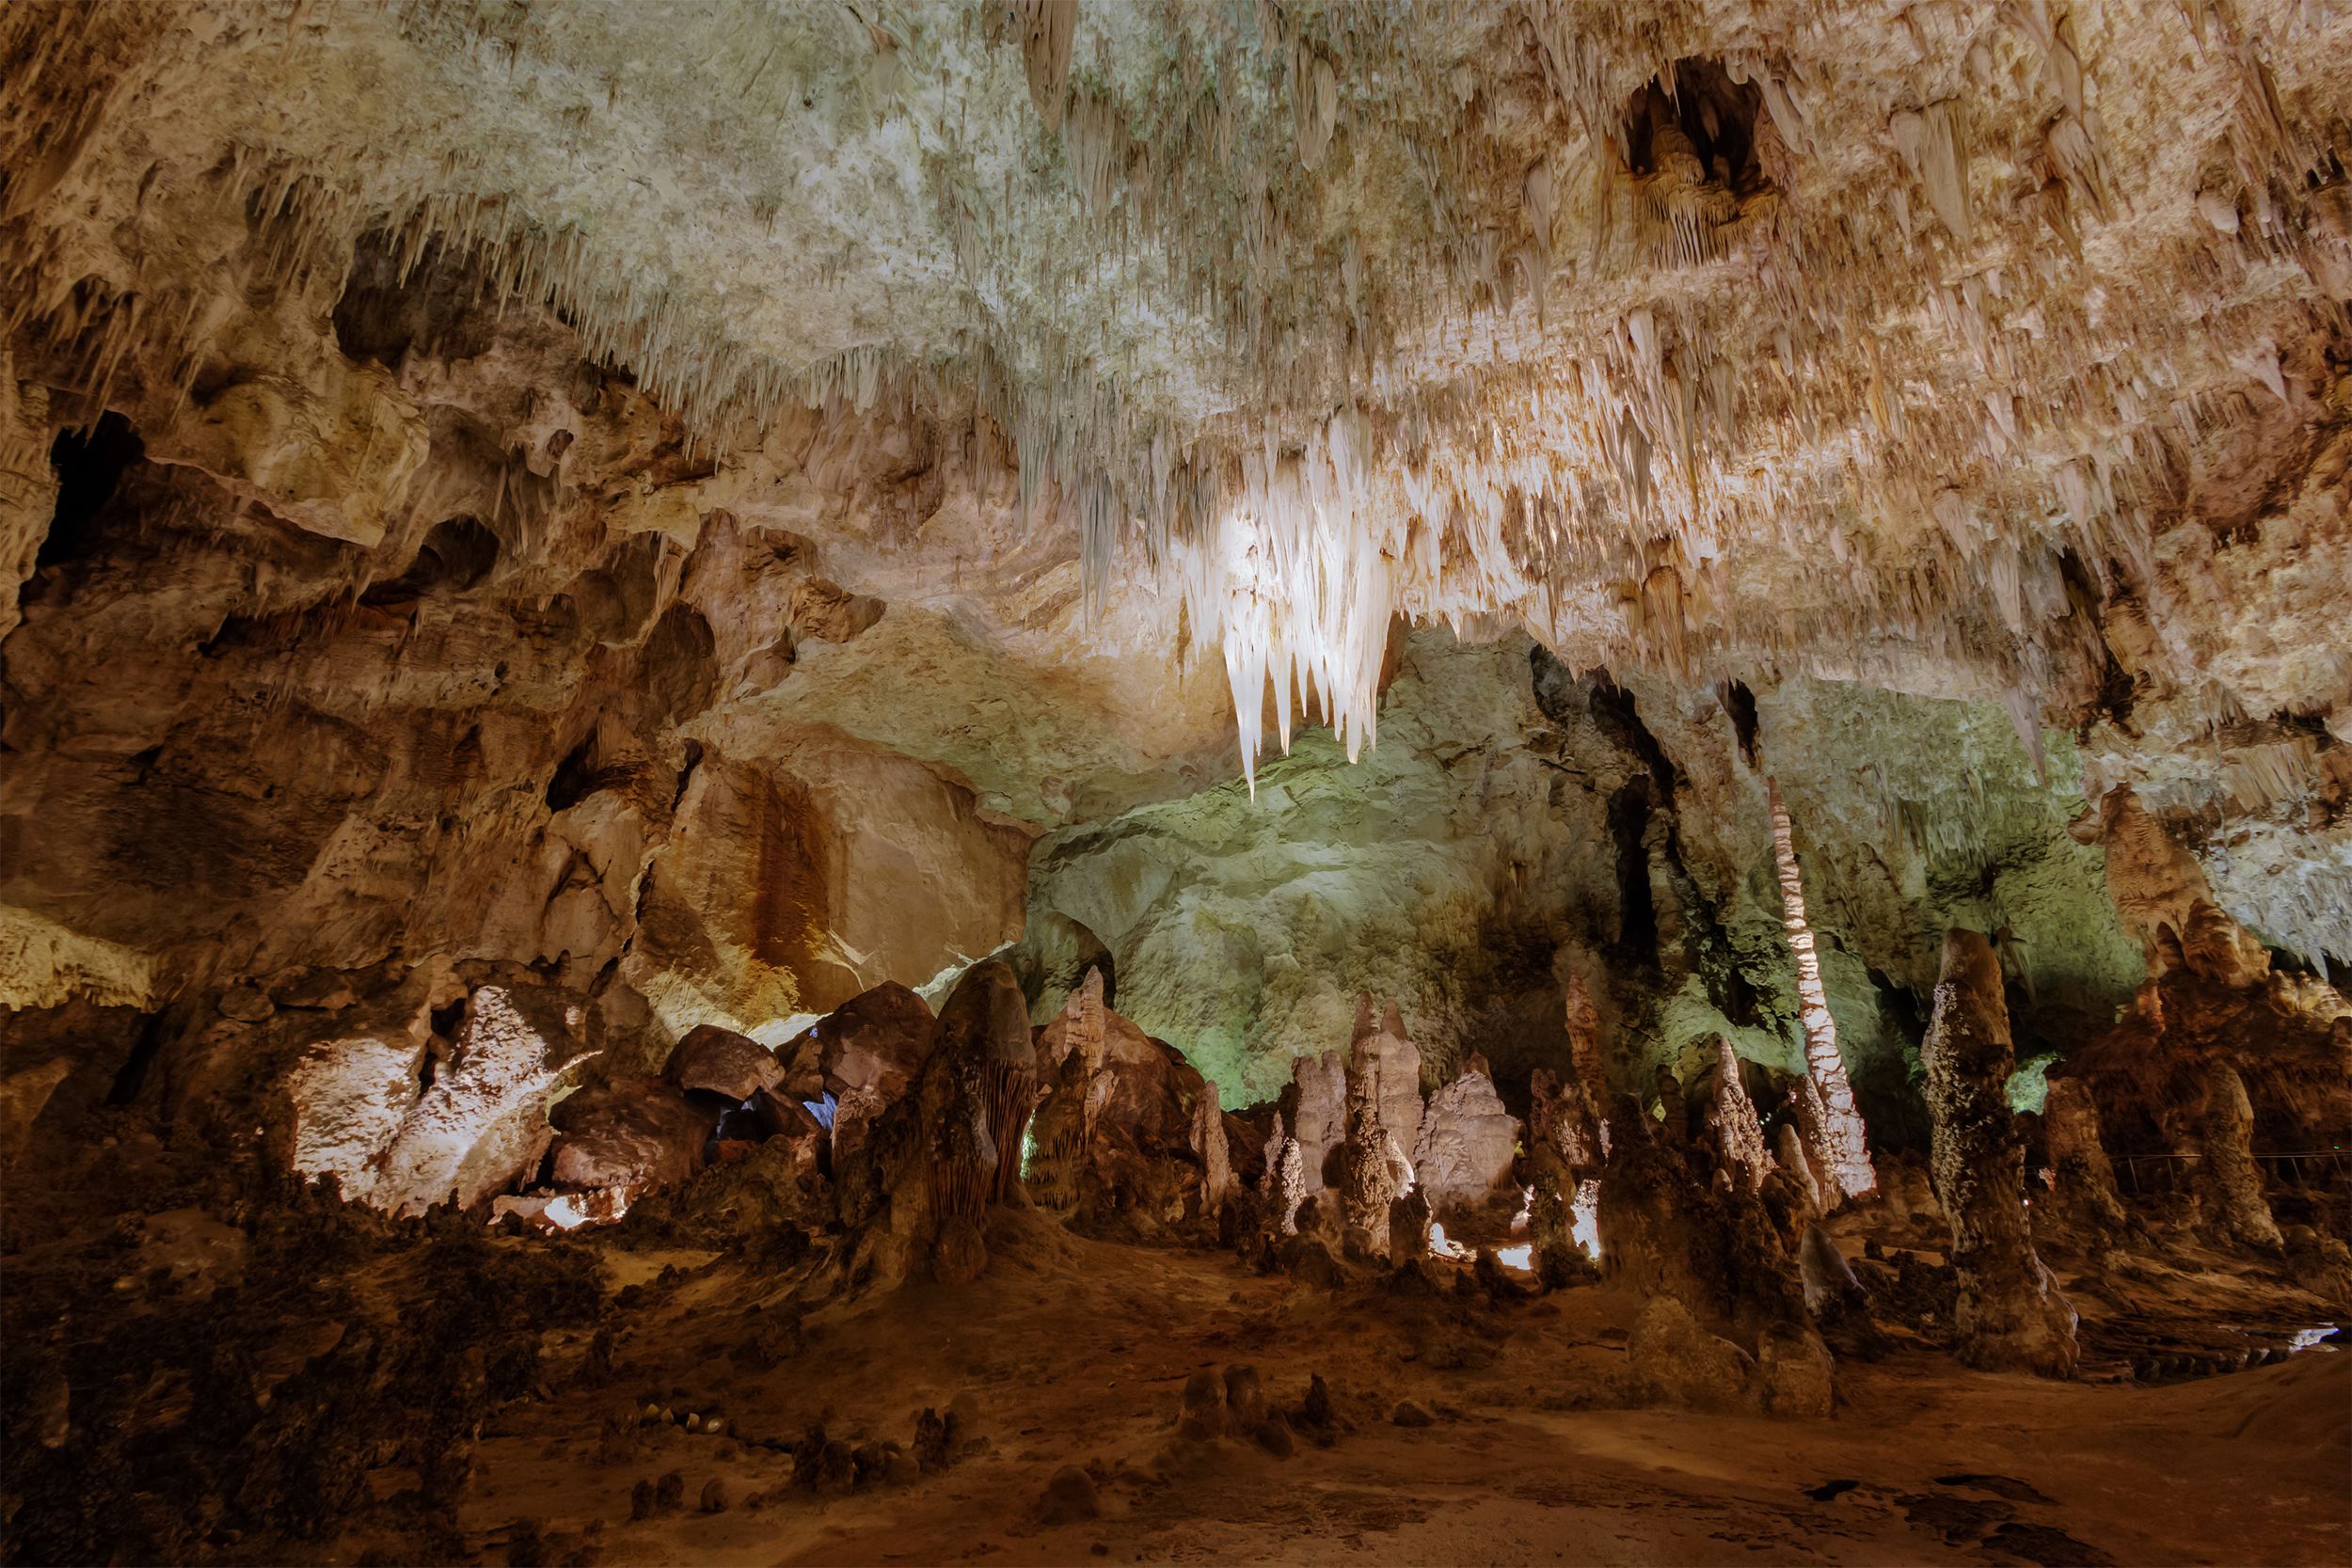 <p>Perhaps most famous for its 119 caves filled with stalagmites and stalactites, <a href="https://www.nps.gov/cave/index.htm">Carlsbad Caverns</a> is also home to an abundance of above-ground treasures in the Chihuahuan Desert including high ancient sea ledges, deep rocky canyons, flowering cactus, and desert wildlife. </p>